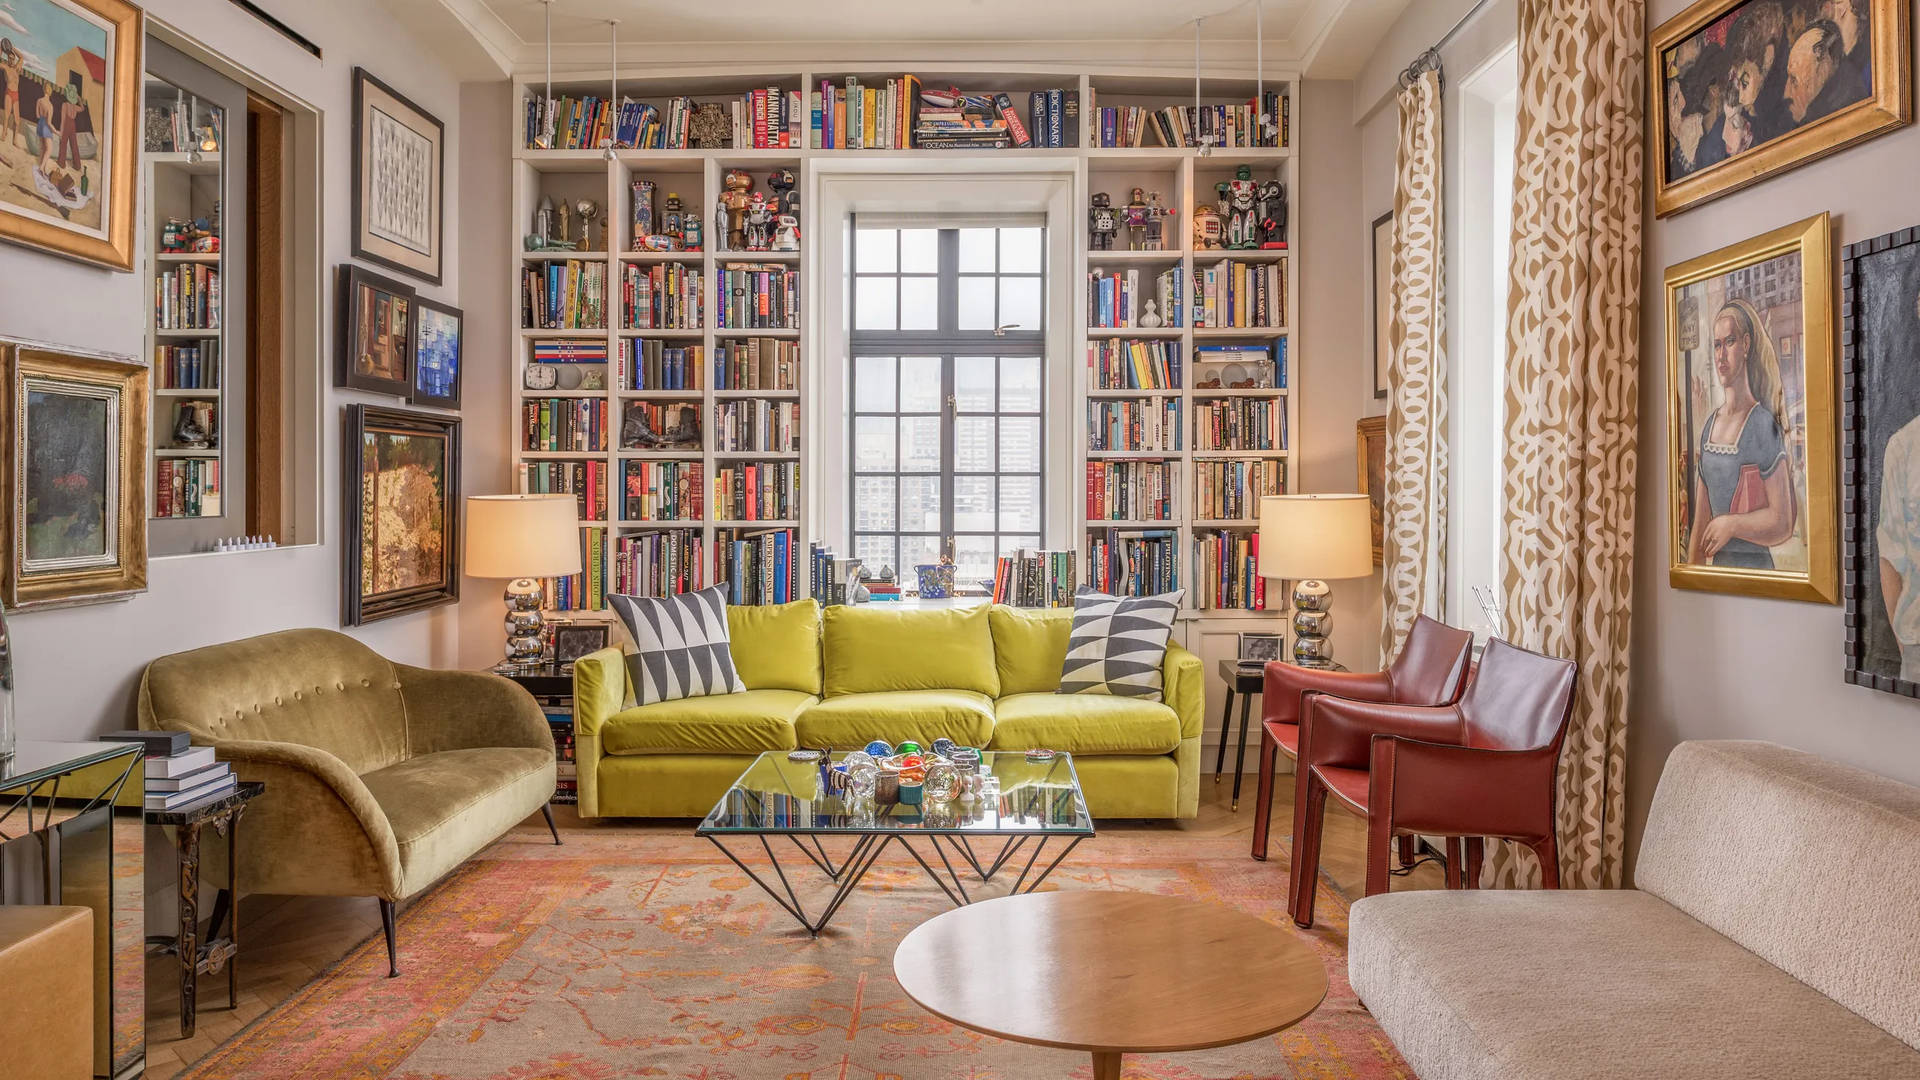 Living Room With Books